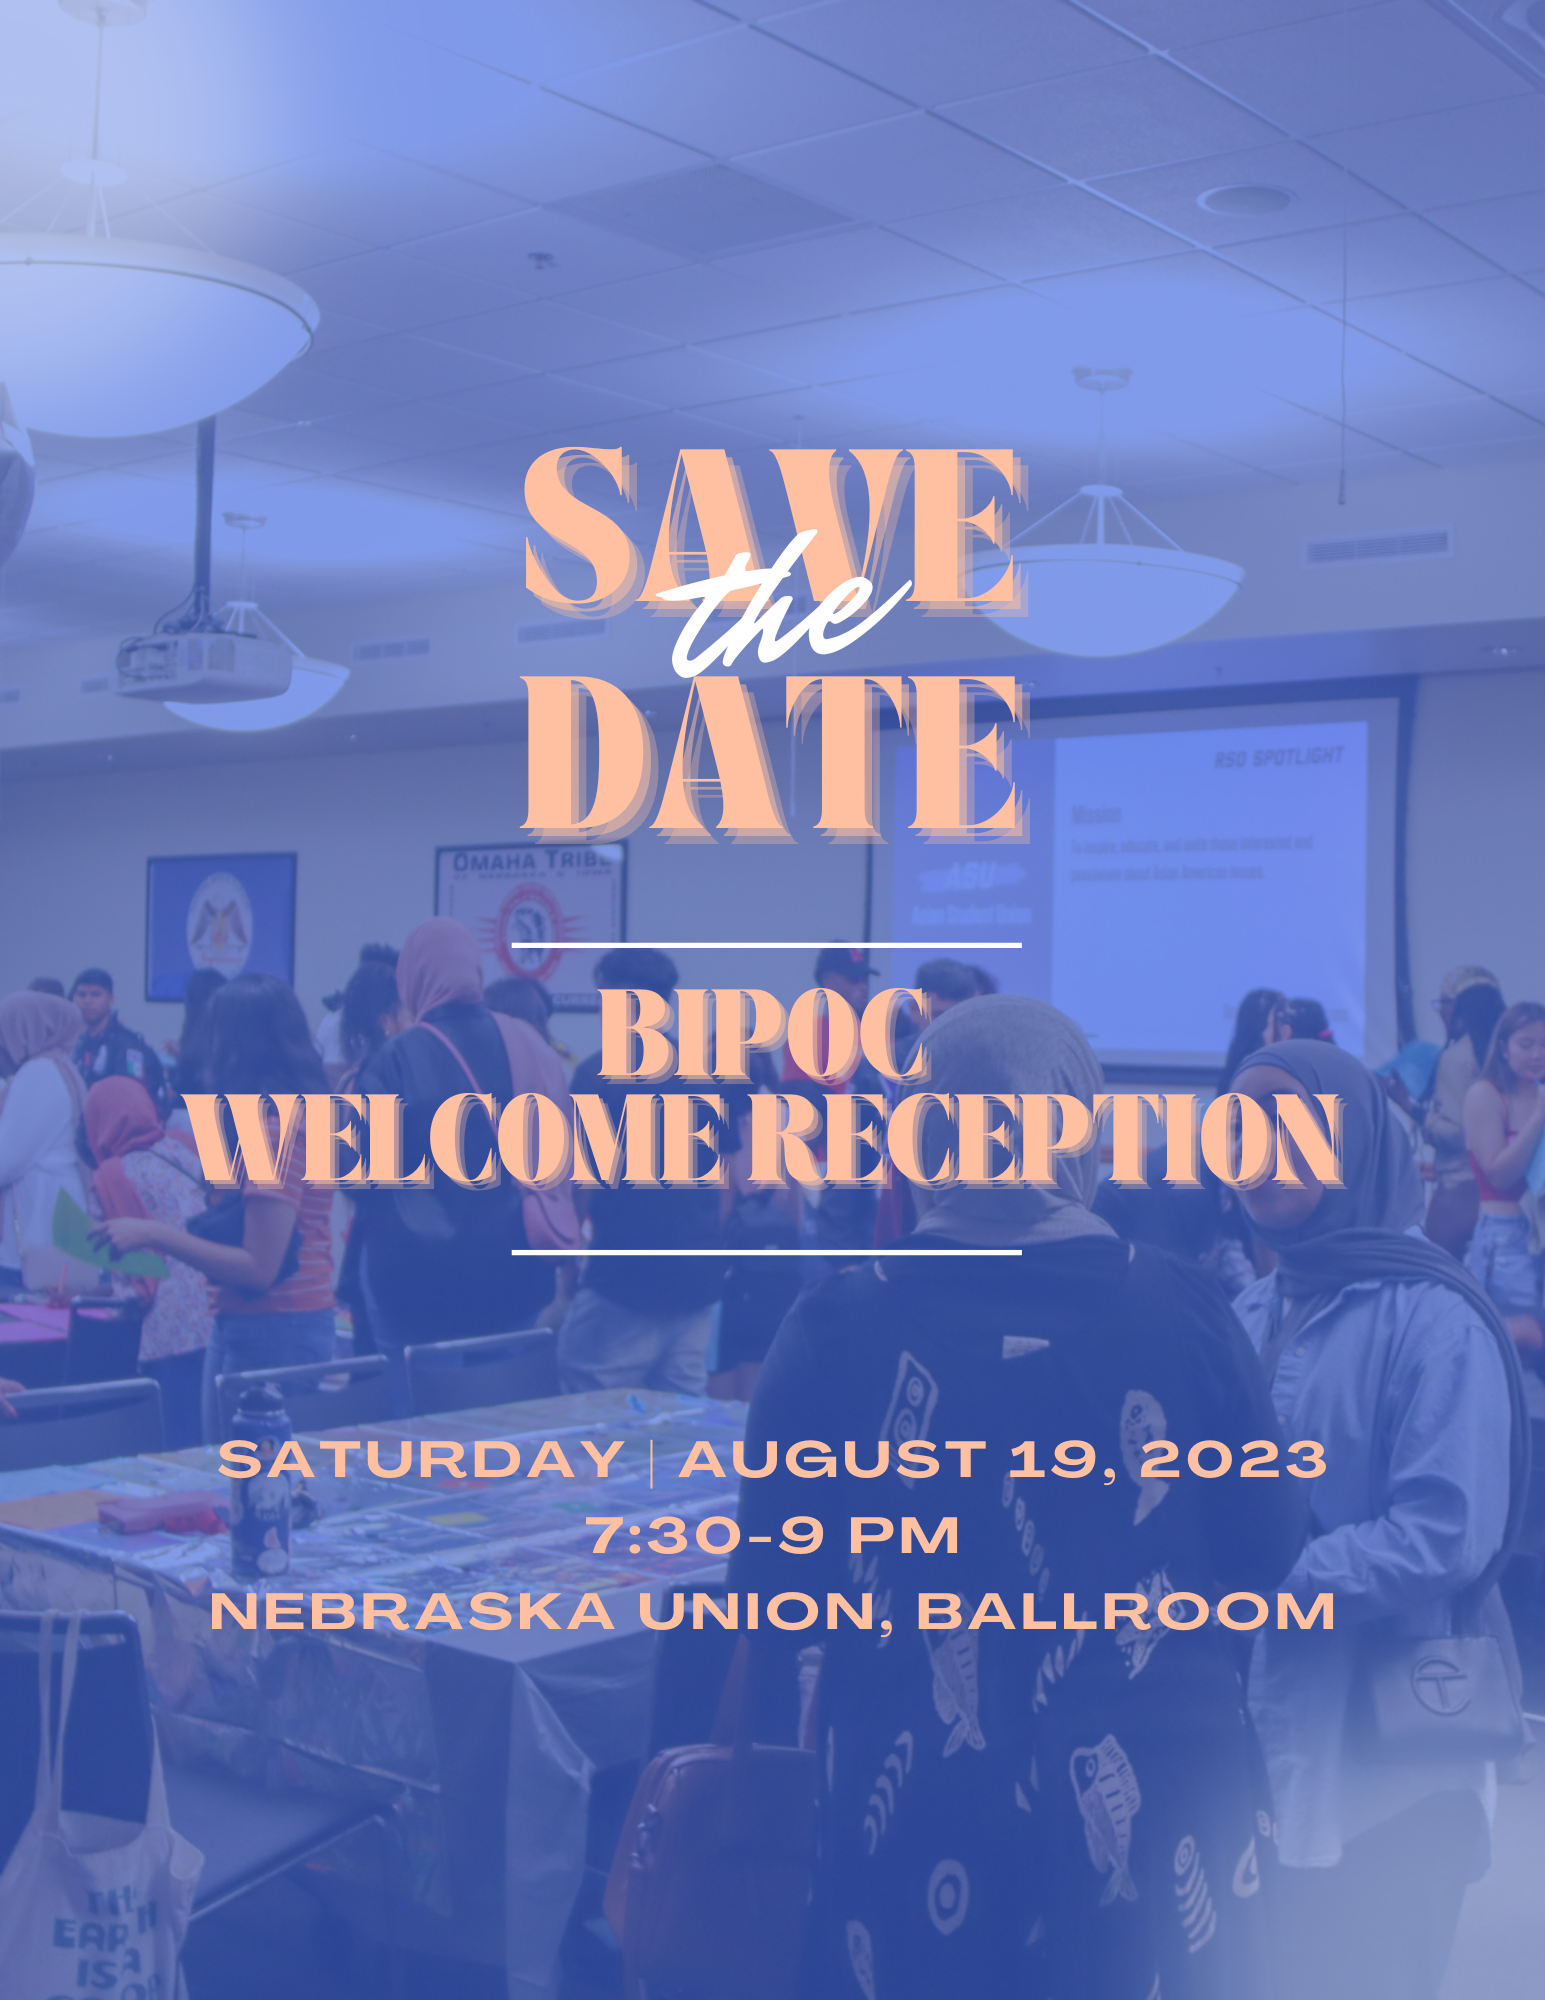 Flyer contains the "save the date" invitation placed over a picture of students gathering at an event.